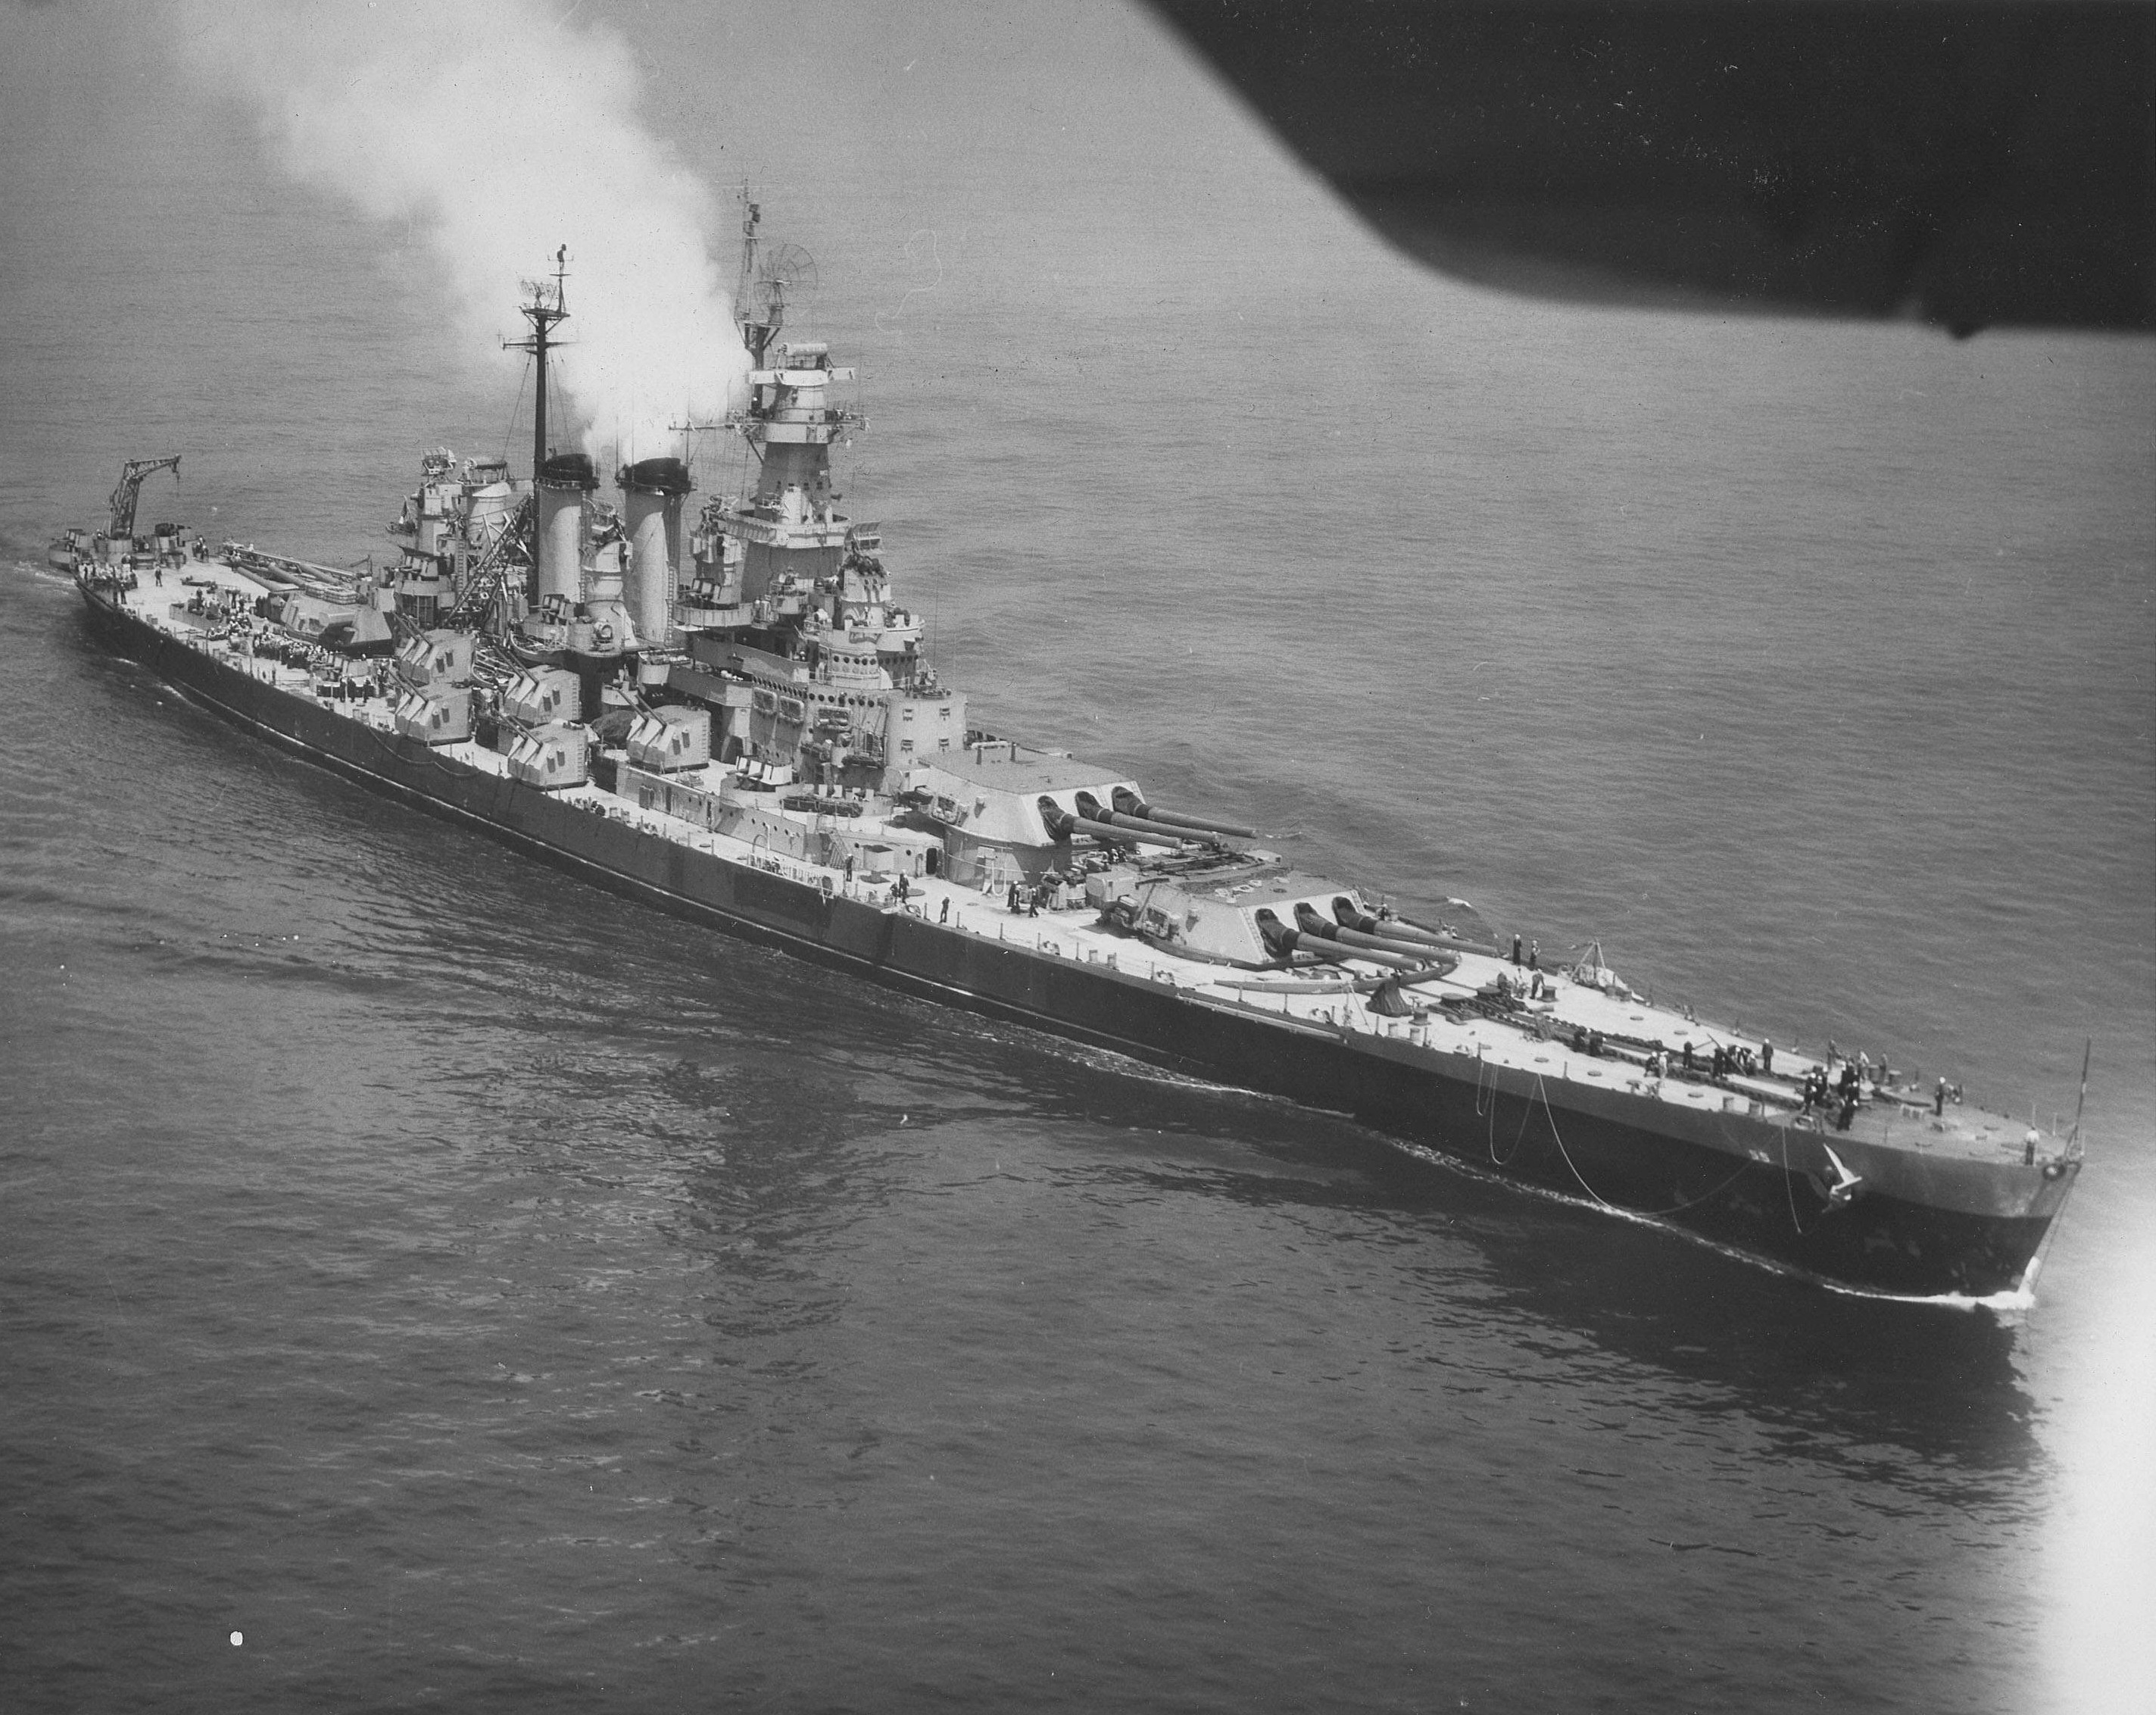 USS North Carolina off New York, New York, United States, 3 Jun 1946, photo 2 of 3; photograph taken by an aircraft from Naval Air Station, New York